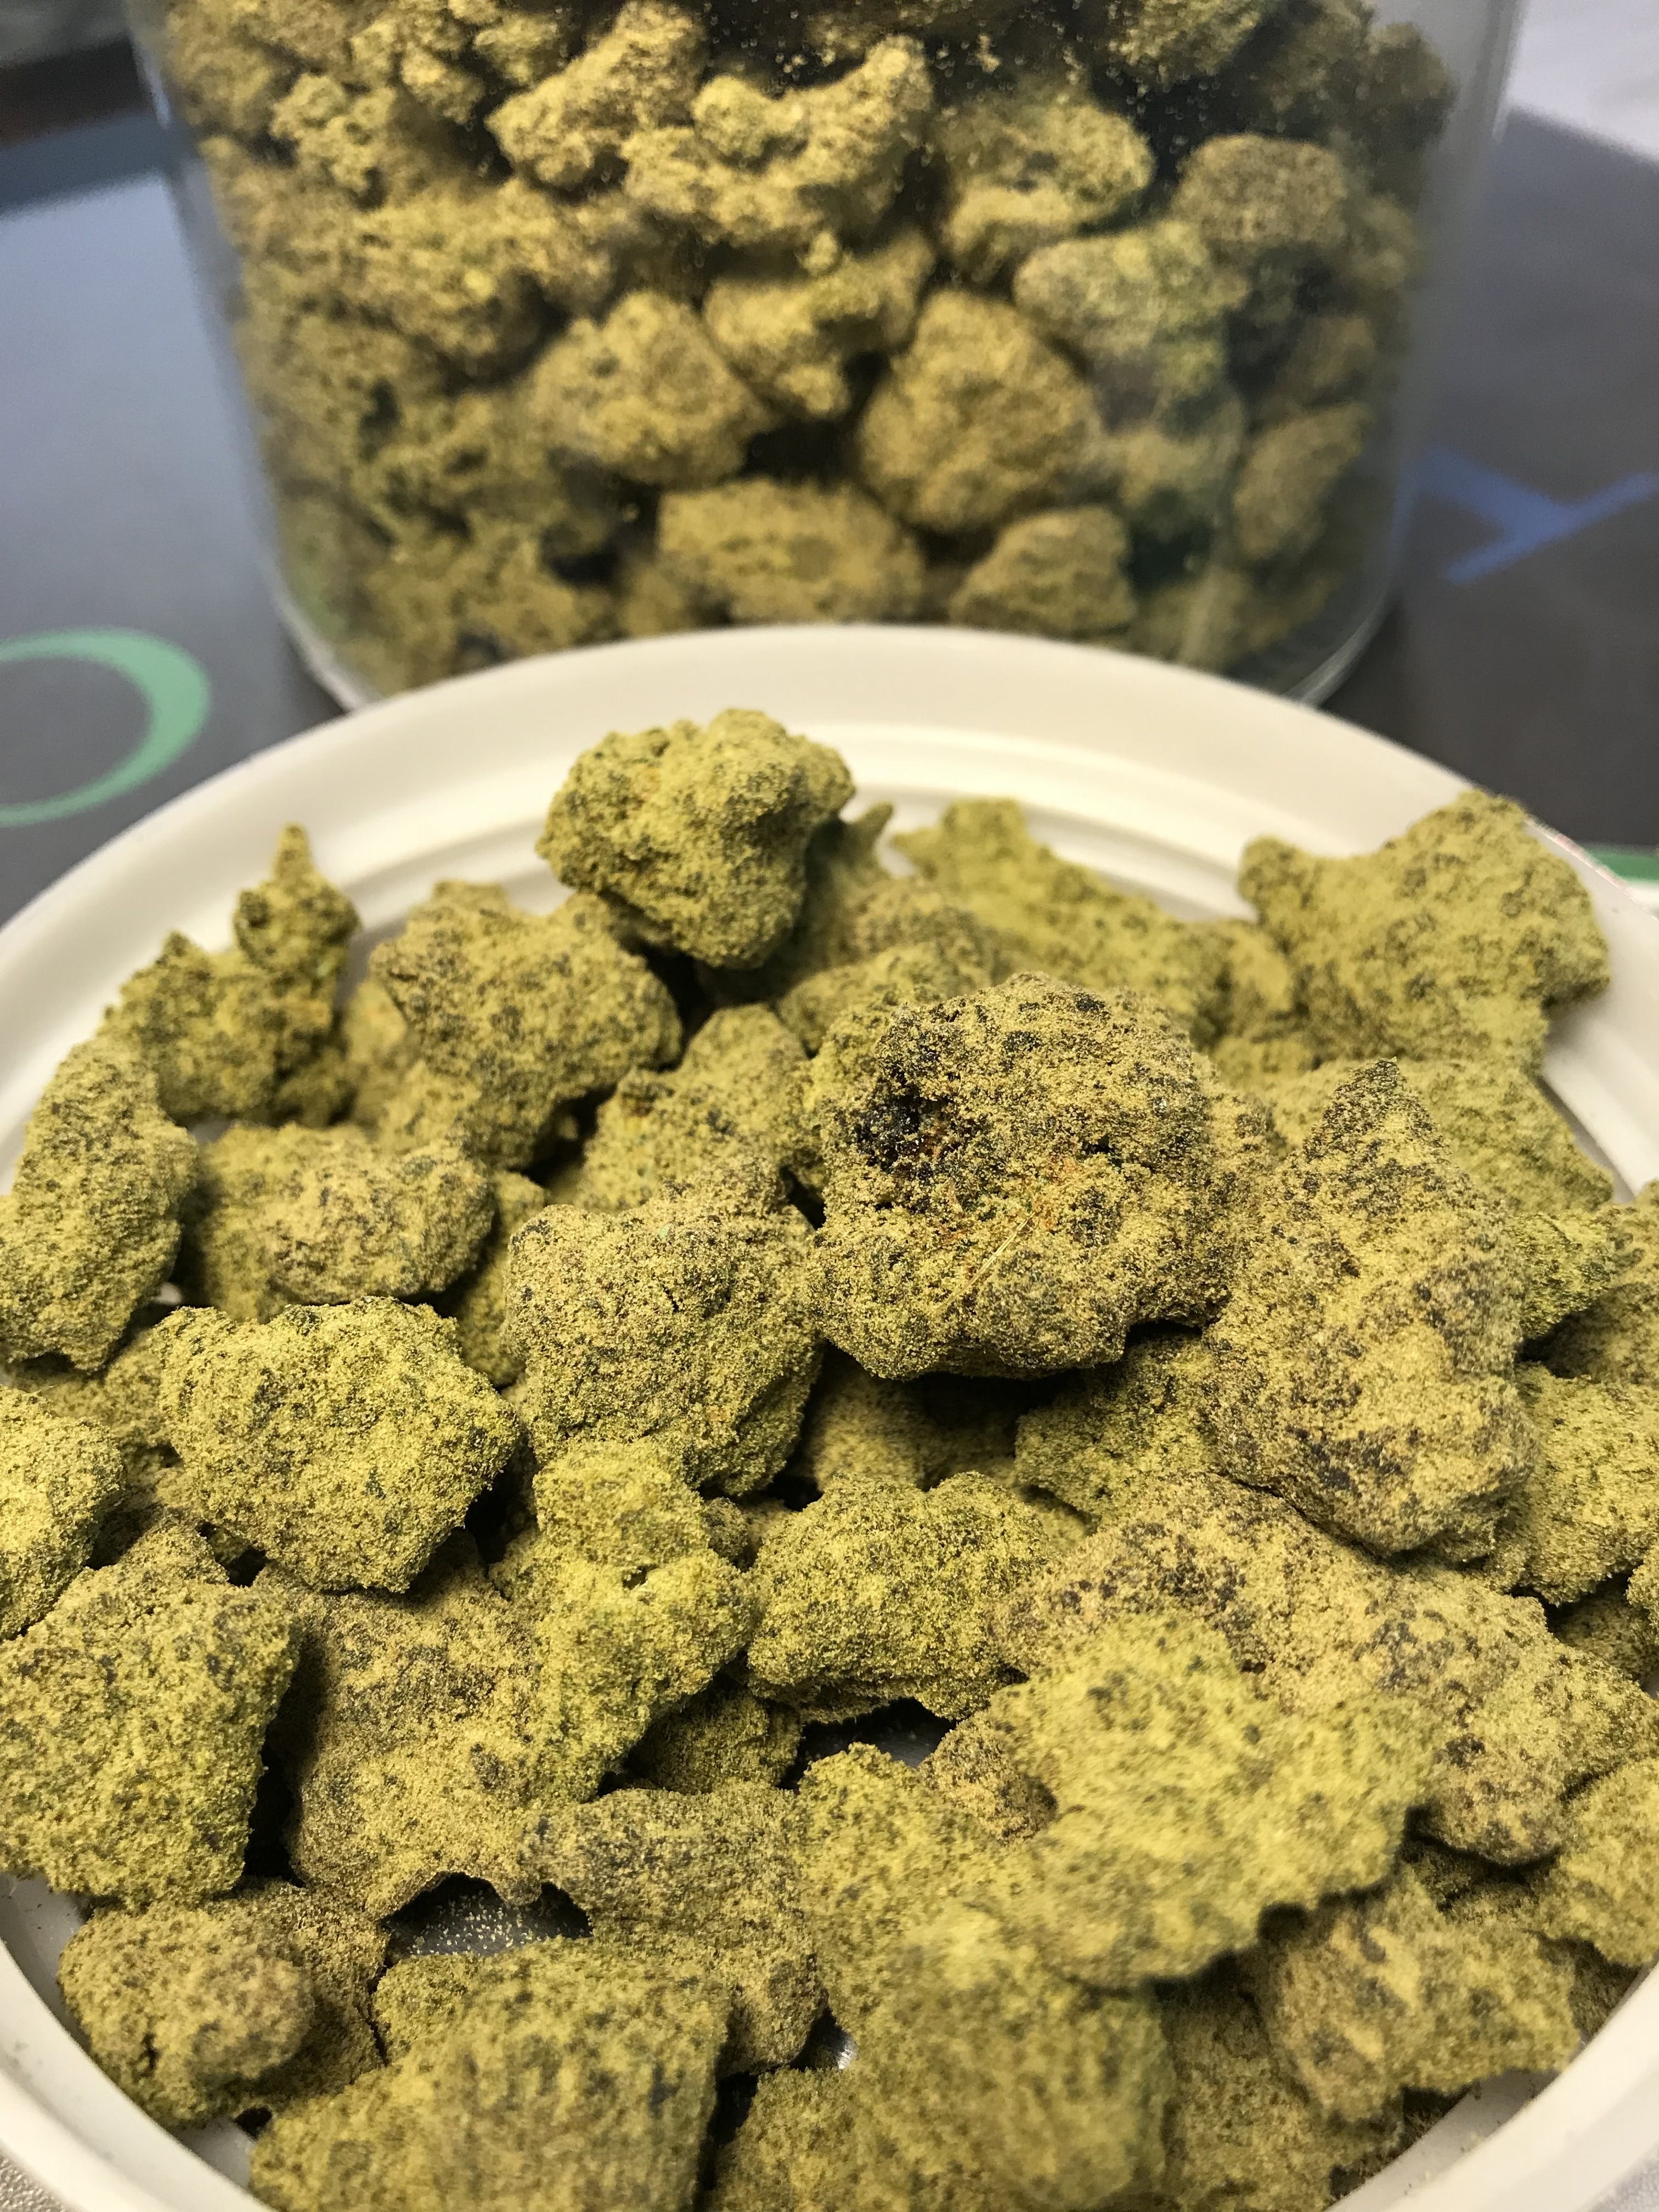 marijuana-dispensaries-the-green-source-lll-in-colorado-springs-thc-white-pines-caviar-in-house